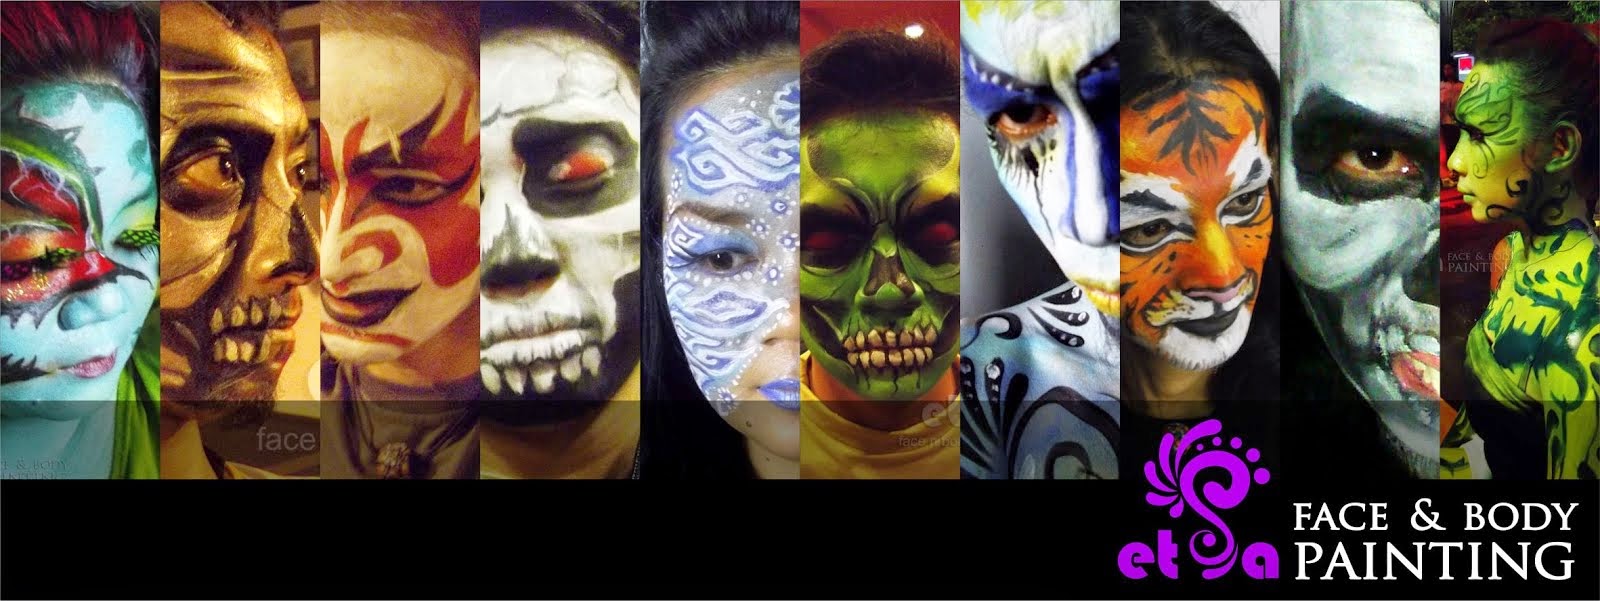 Face Painting vs Body Painting - wide 7